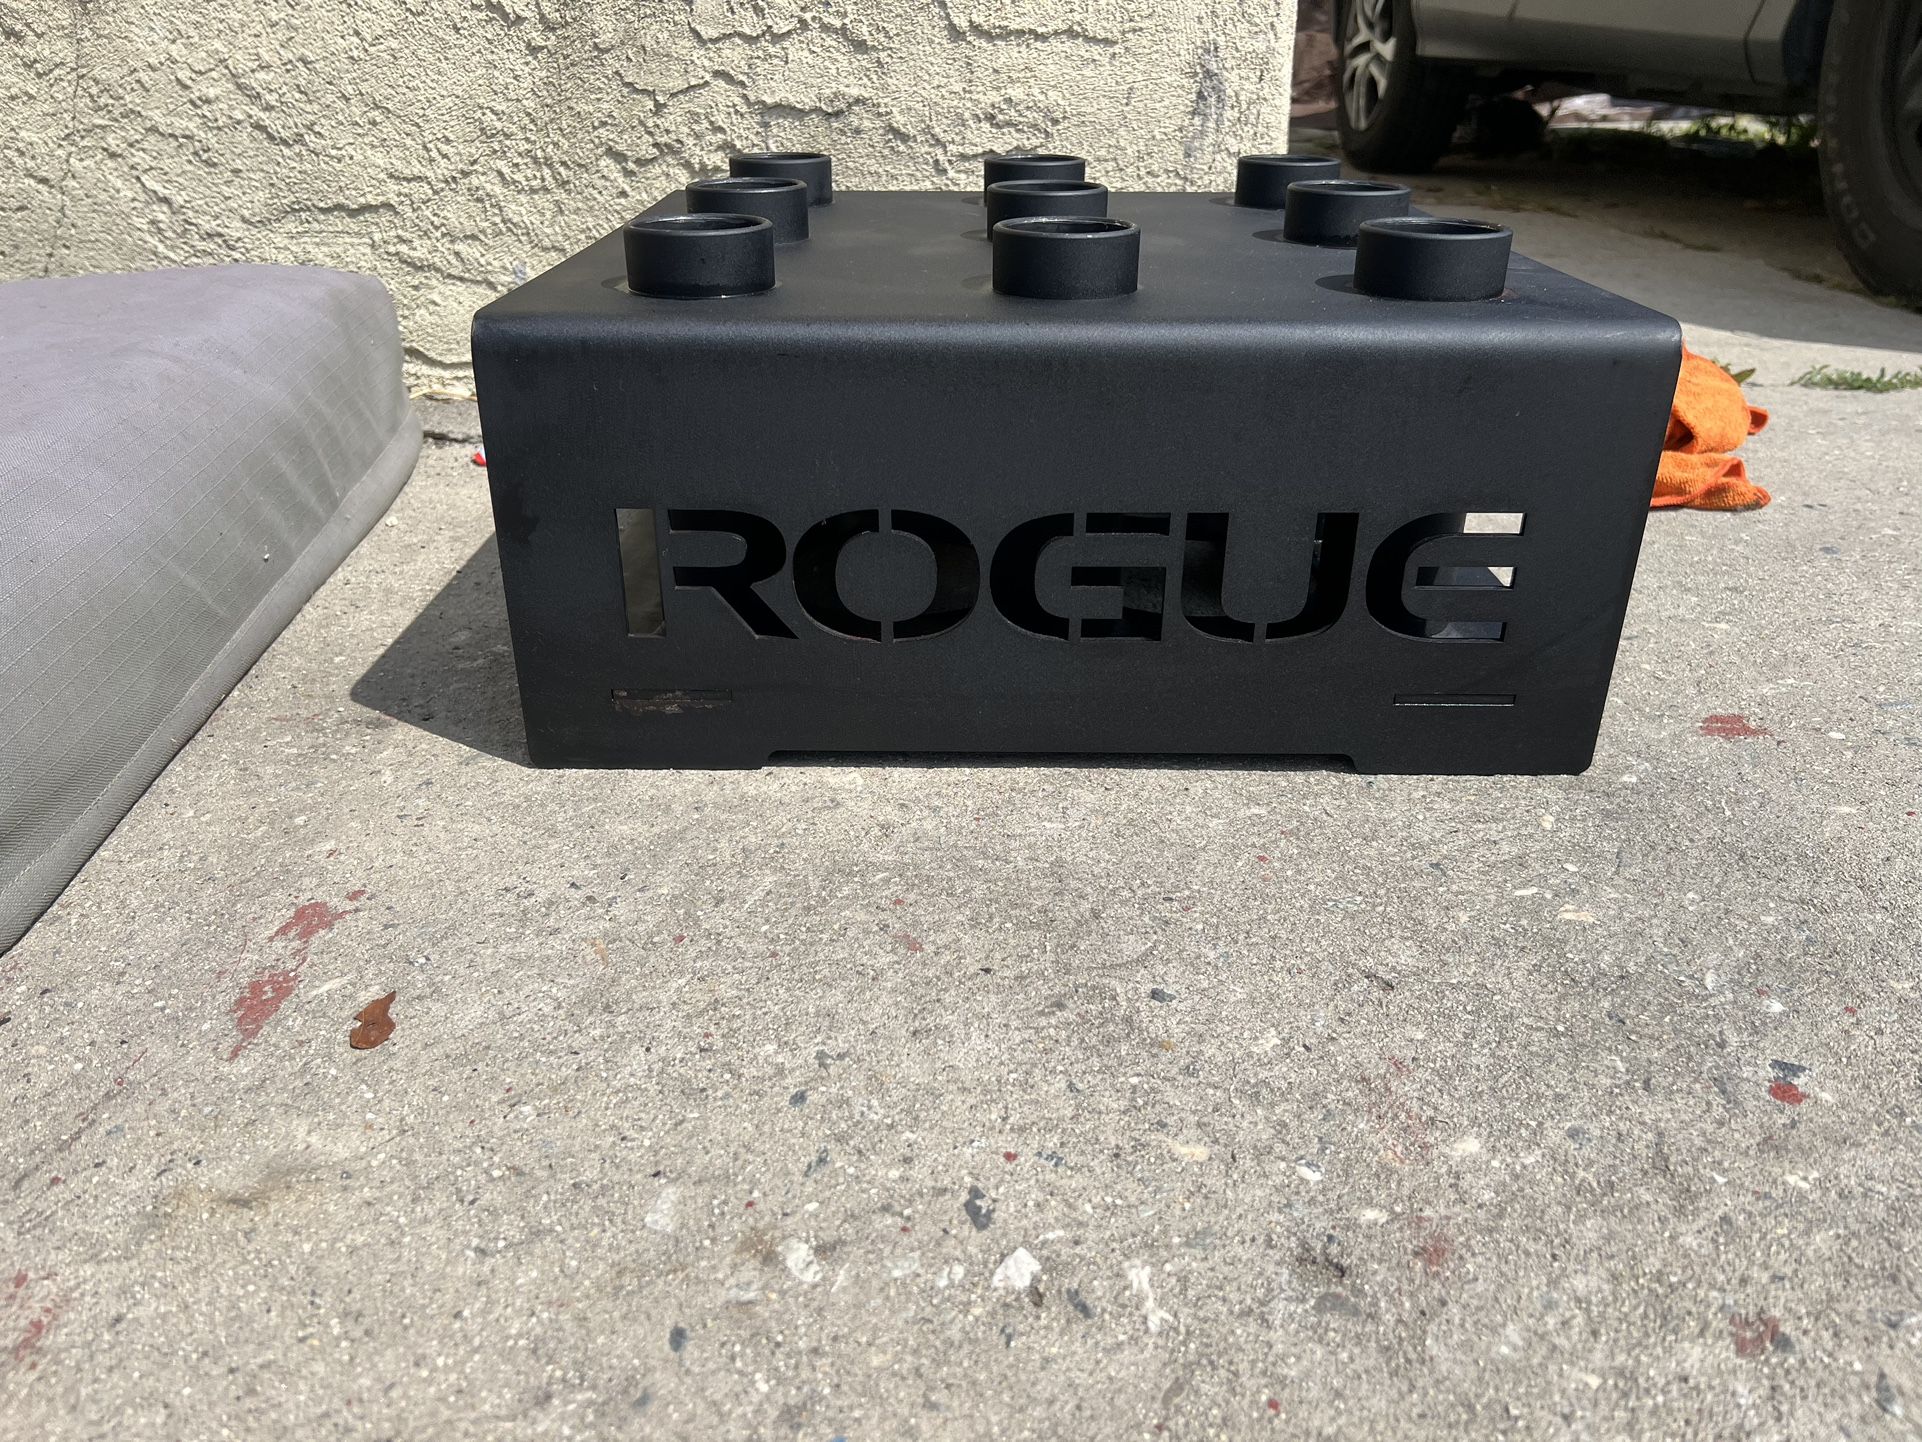 Rogue Barbell Storage